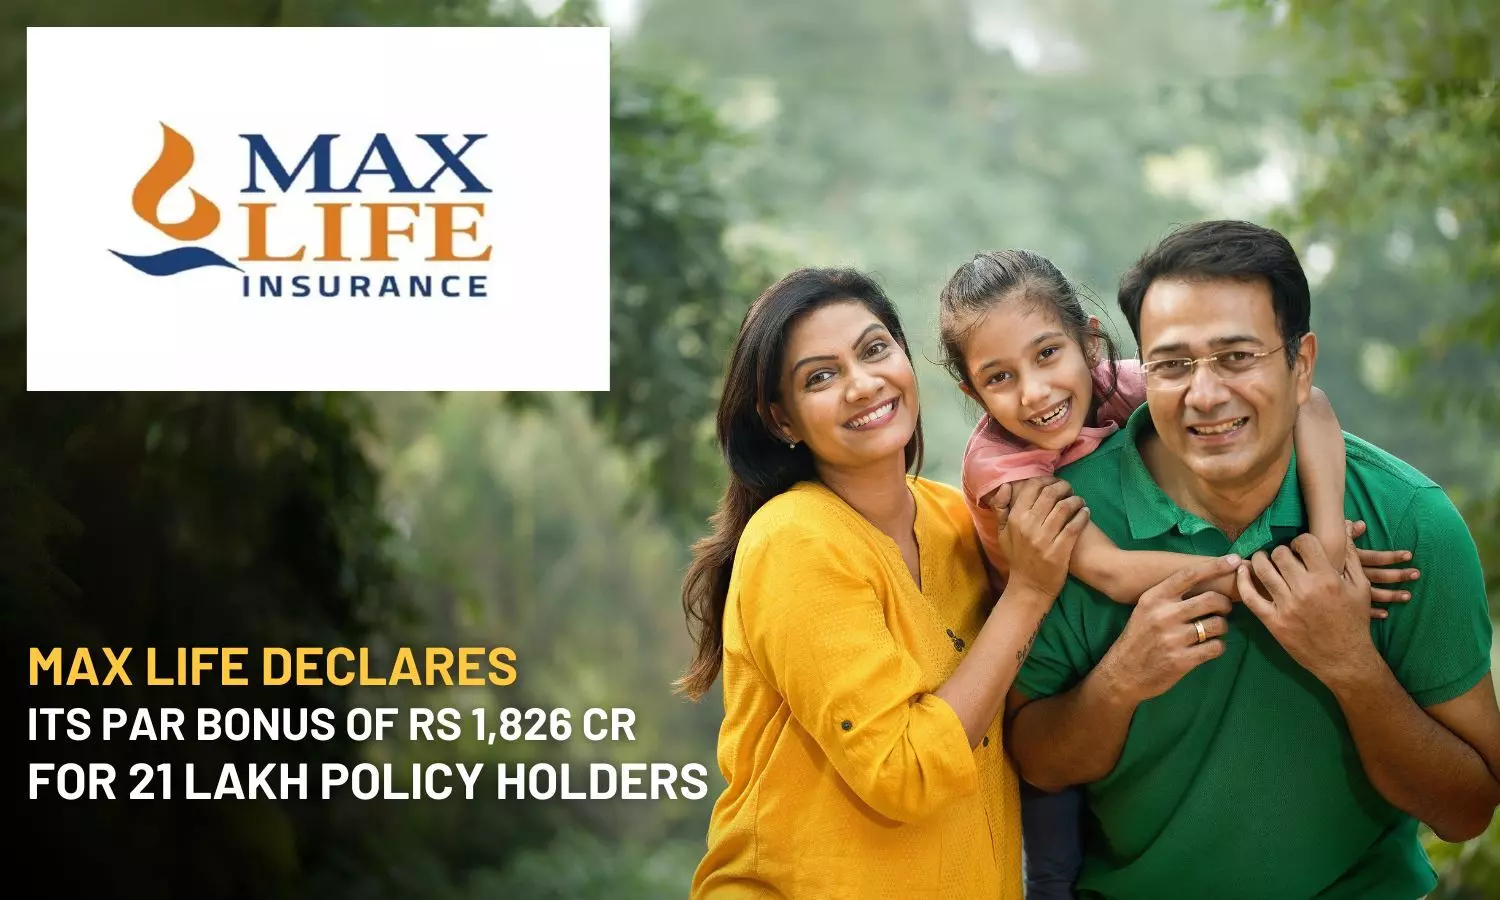 Max Life declares its PAR Bonus of Rs 1,826 Cr for 21 lakh policyholders